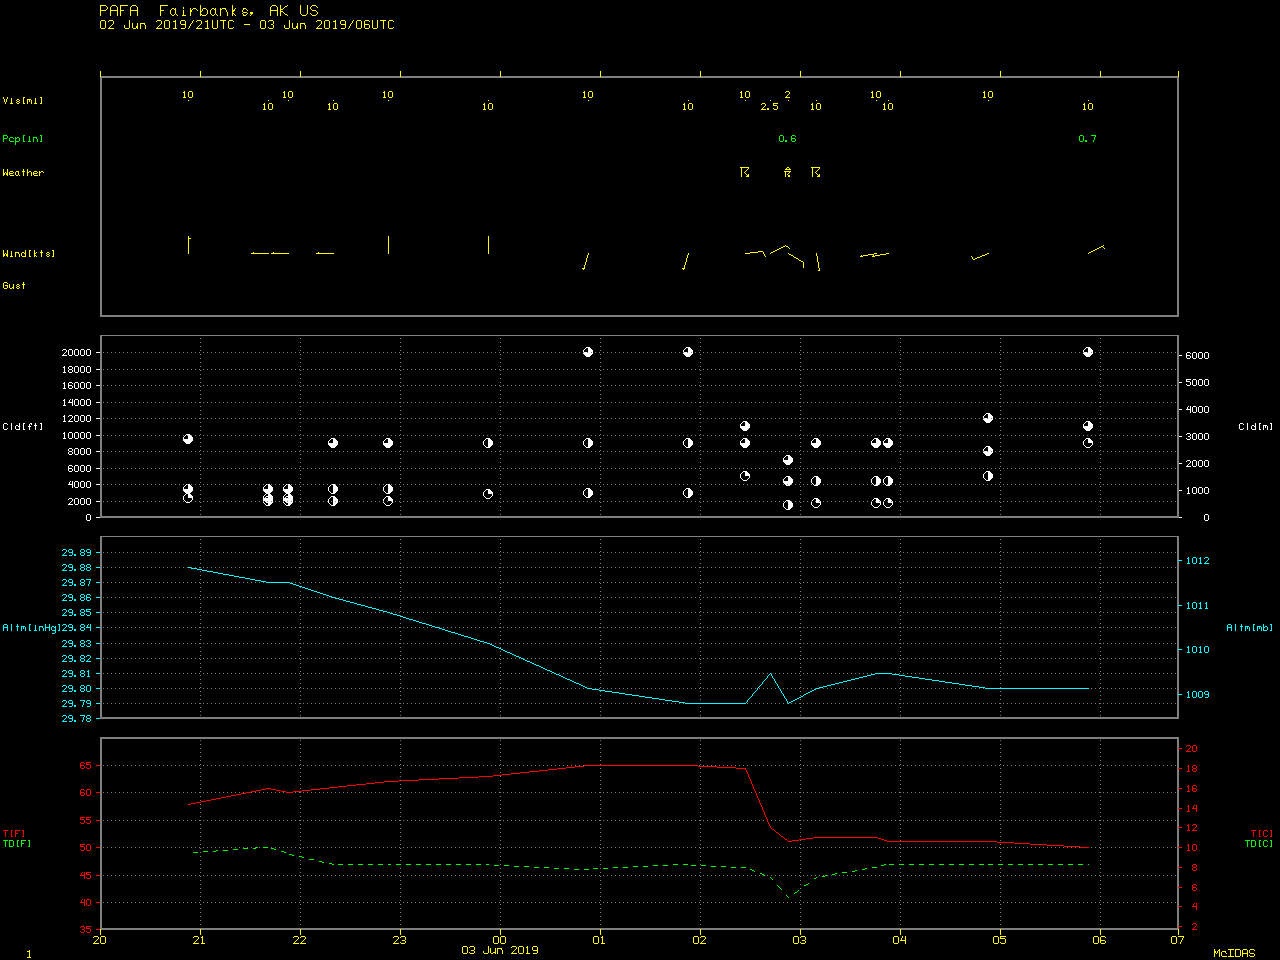 Time series of surface report data from Fairbanks International Airport [click to enlarge]